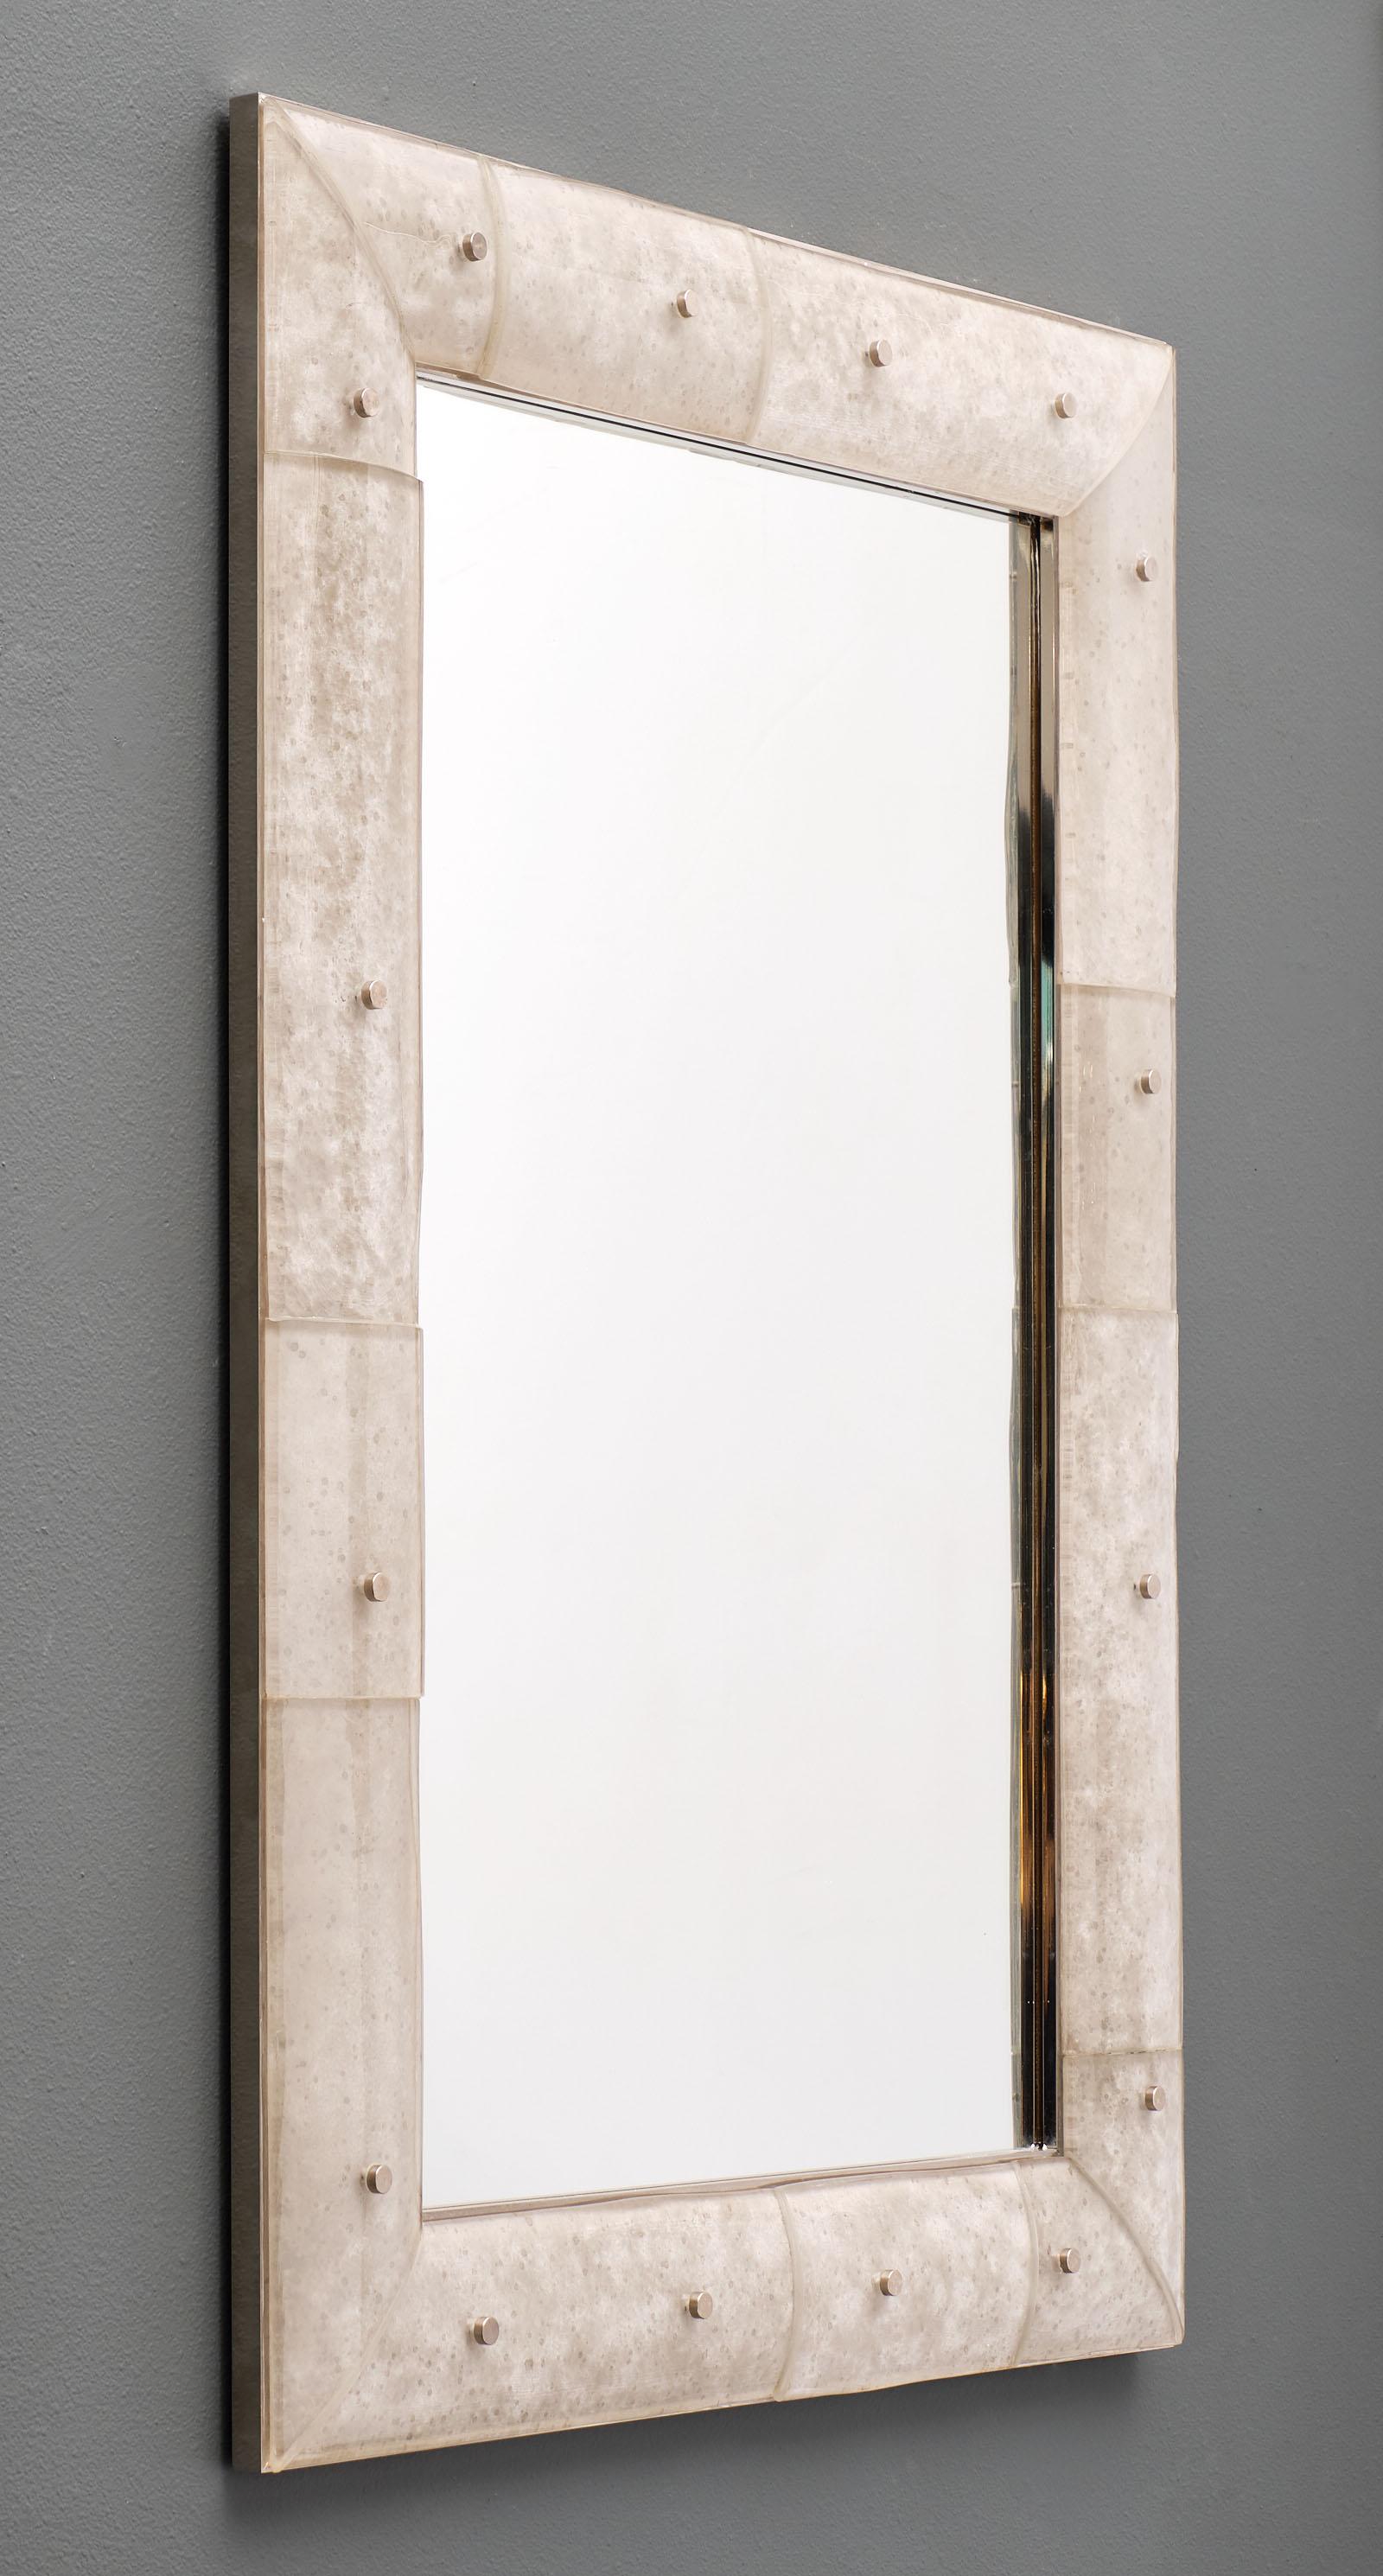 A pair of Murano glass modernist mirrors featuring multiple hand-blown components of textured and smoked glass that form the frames. They are held in place by the chrome structures. We love the organic feel of the glass.